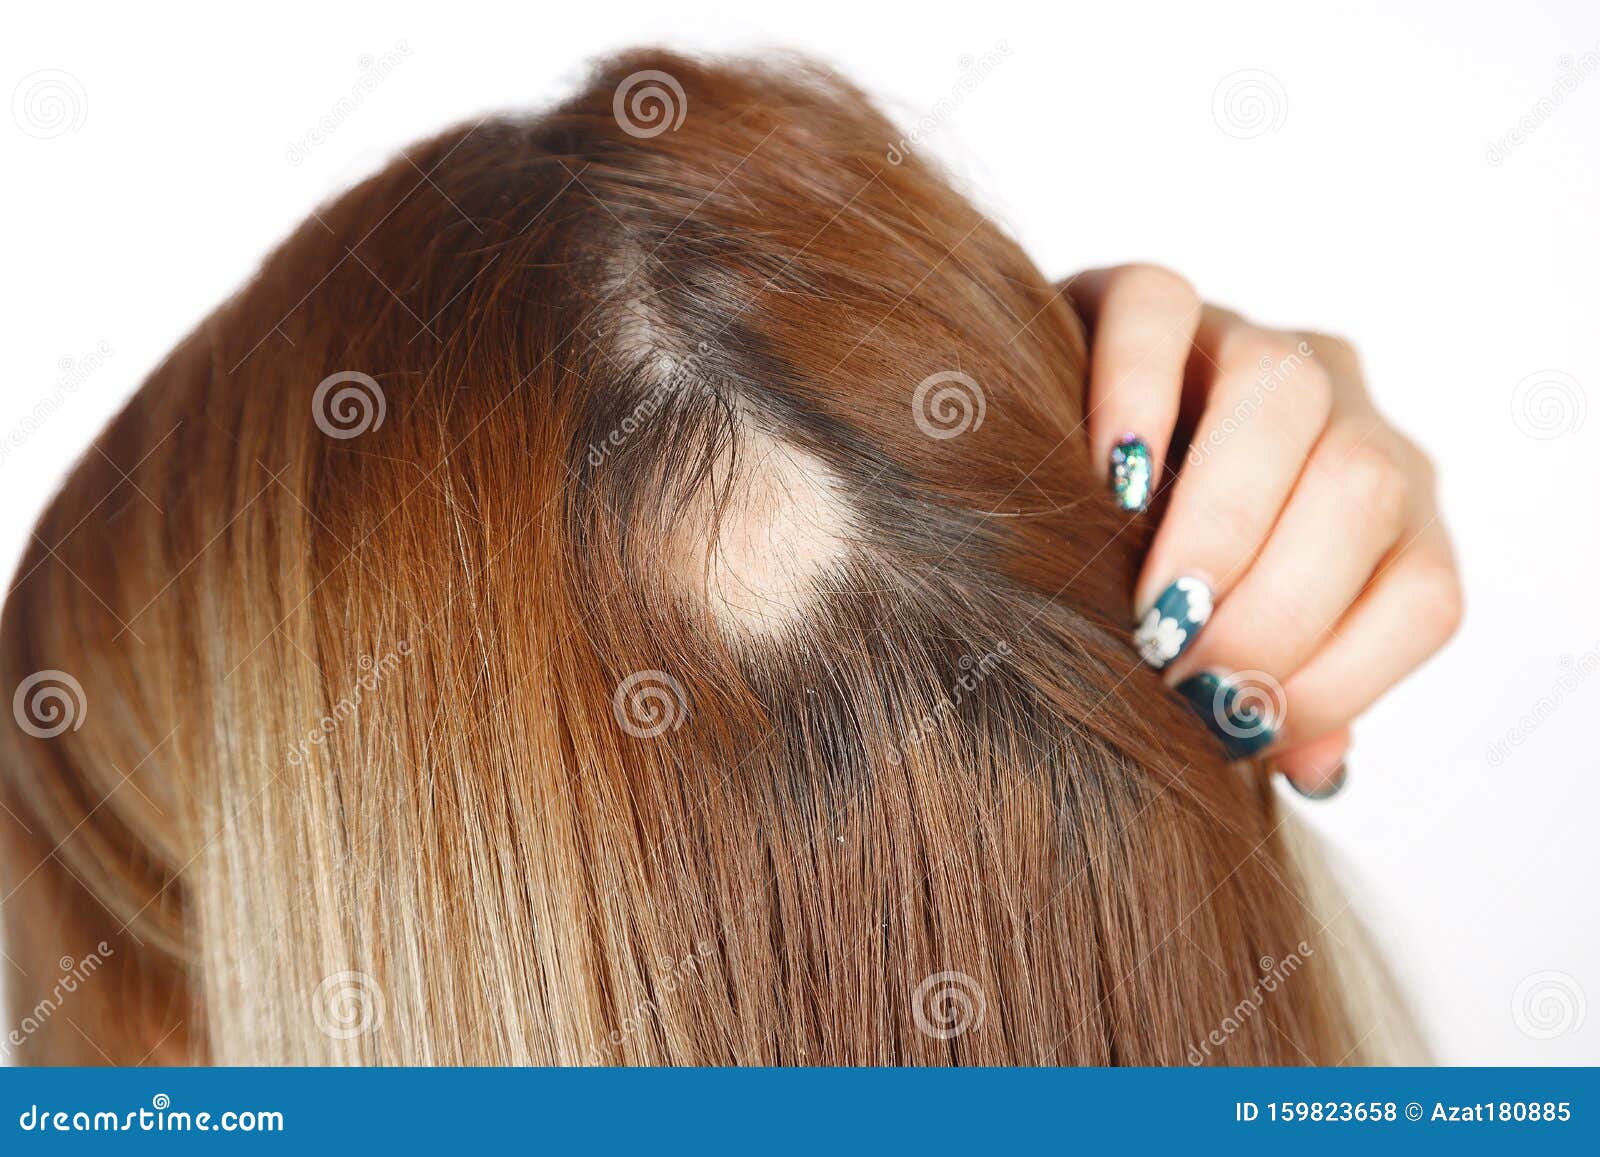 30 Year Old Caucasian Woman with Spot Alopecia, Bald Spot on Her Head